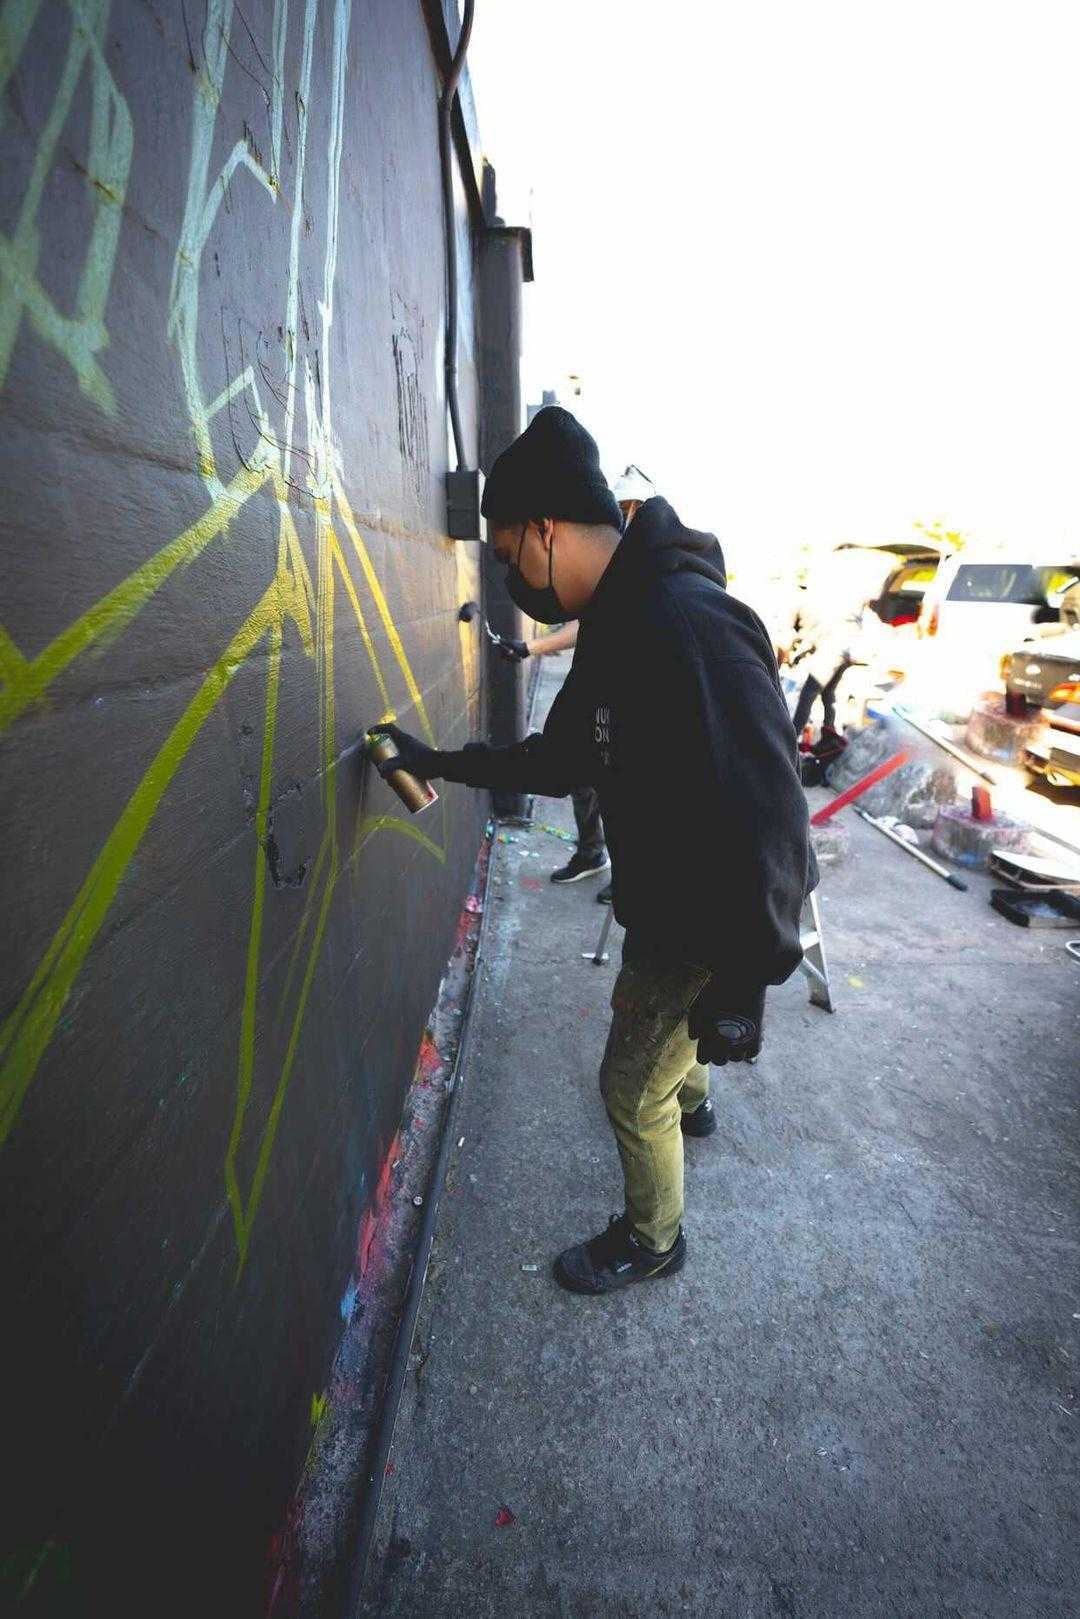 Guy spray painting mural on a wall